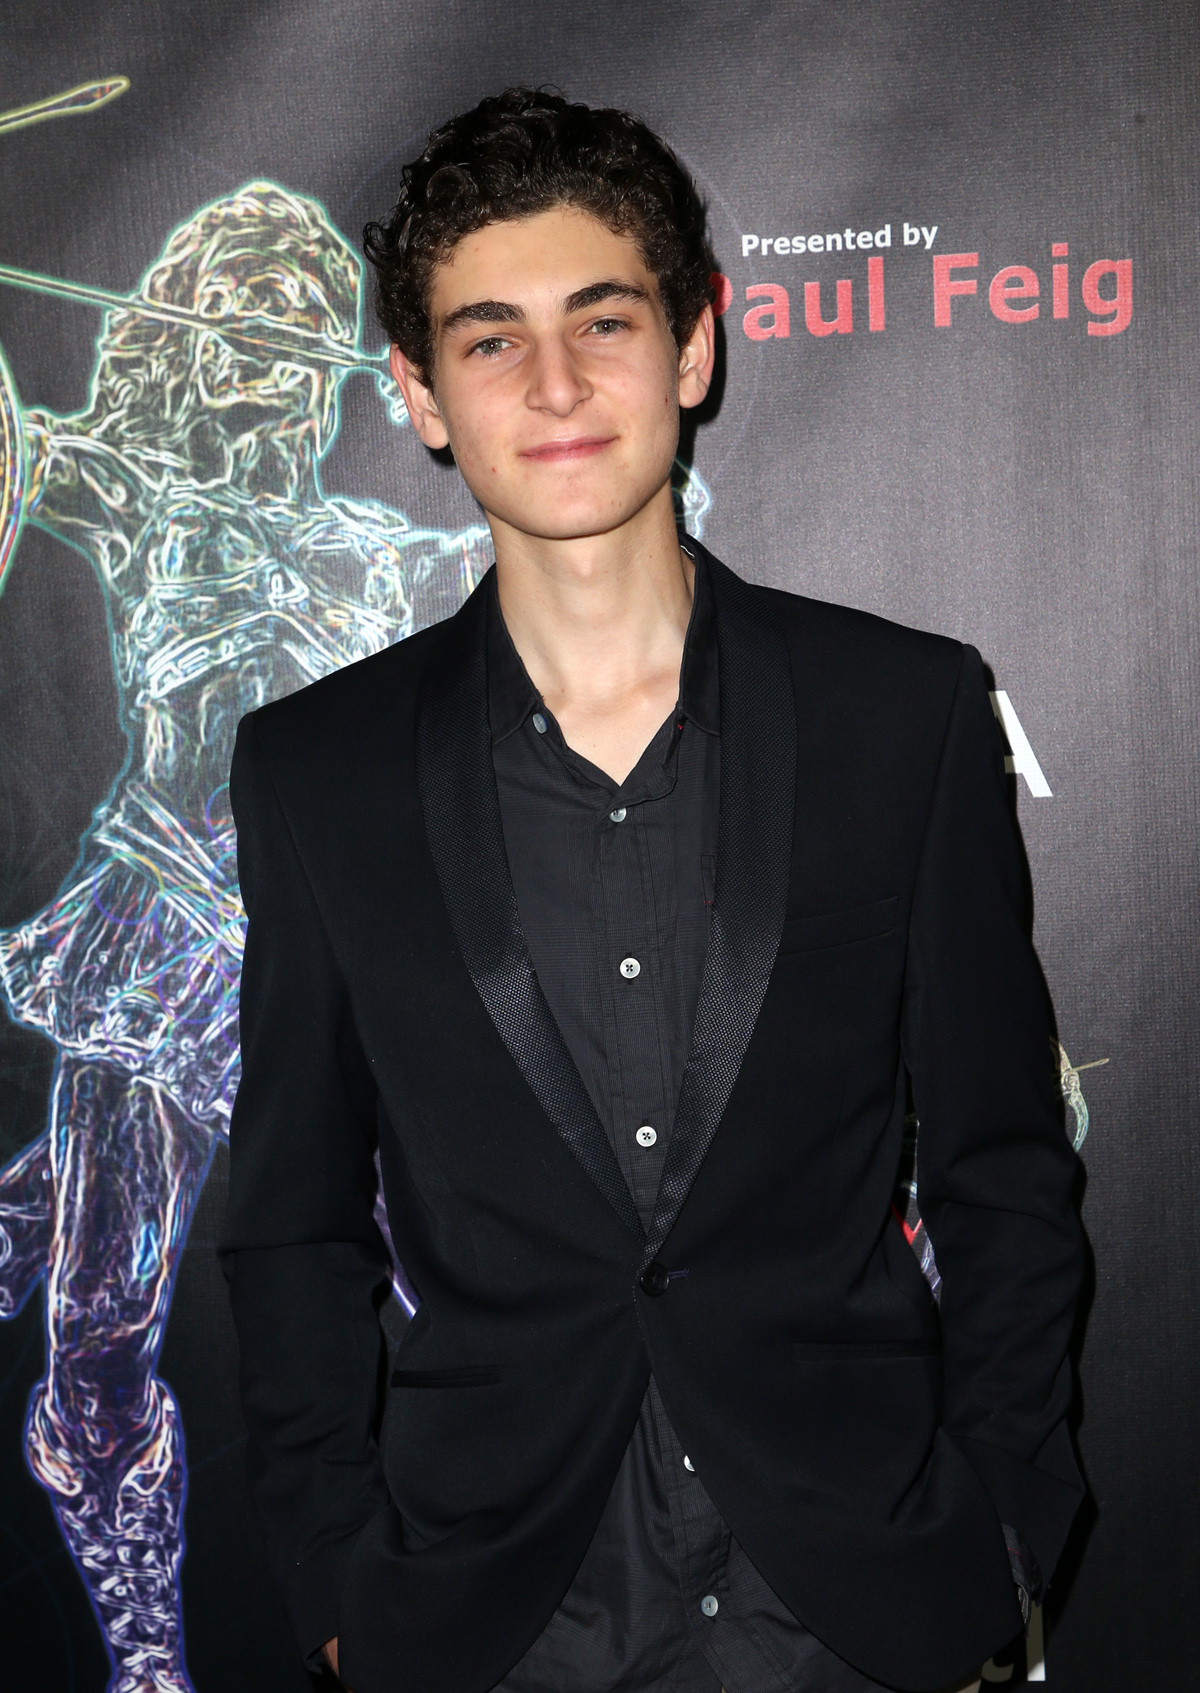 BEVERLY HILLS, CA - APRIL 26: David Mazouz, at the 2018 Artemis Awards Gala at the Ahrya Fine Arts Theater in Beverly Hills, California on April 26, 2018. Credit: Faye Sadou/MediaPunch